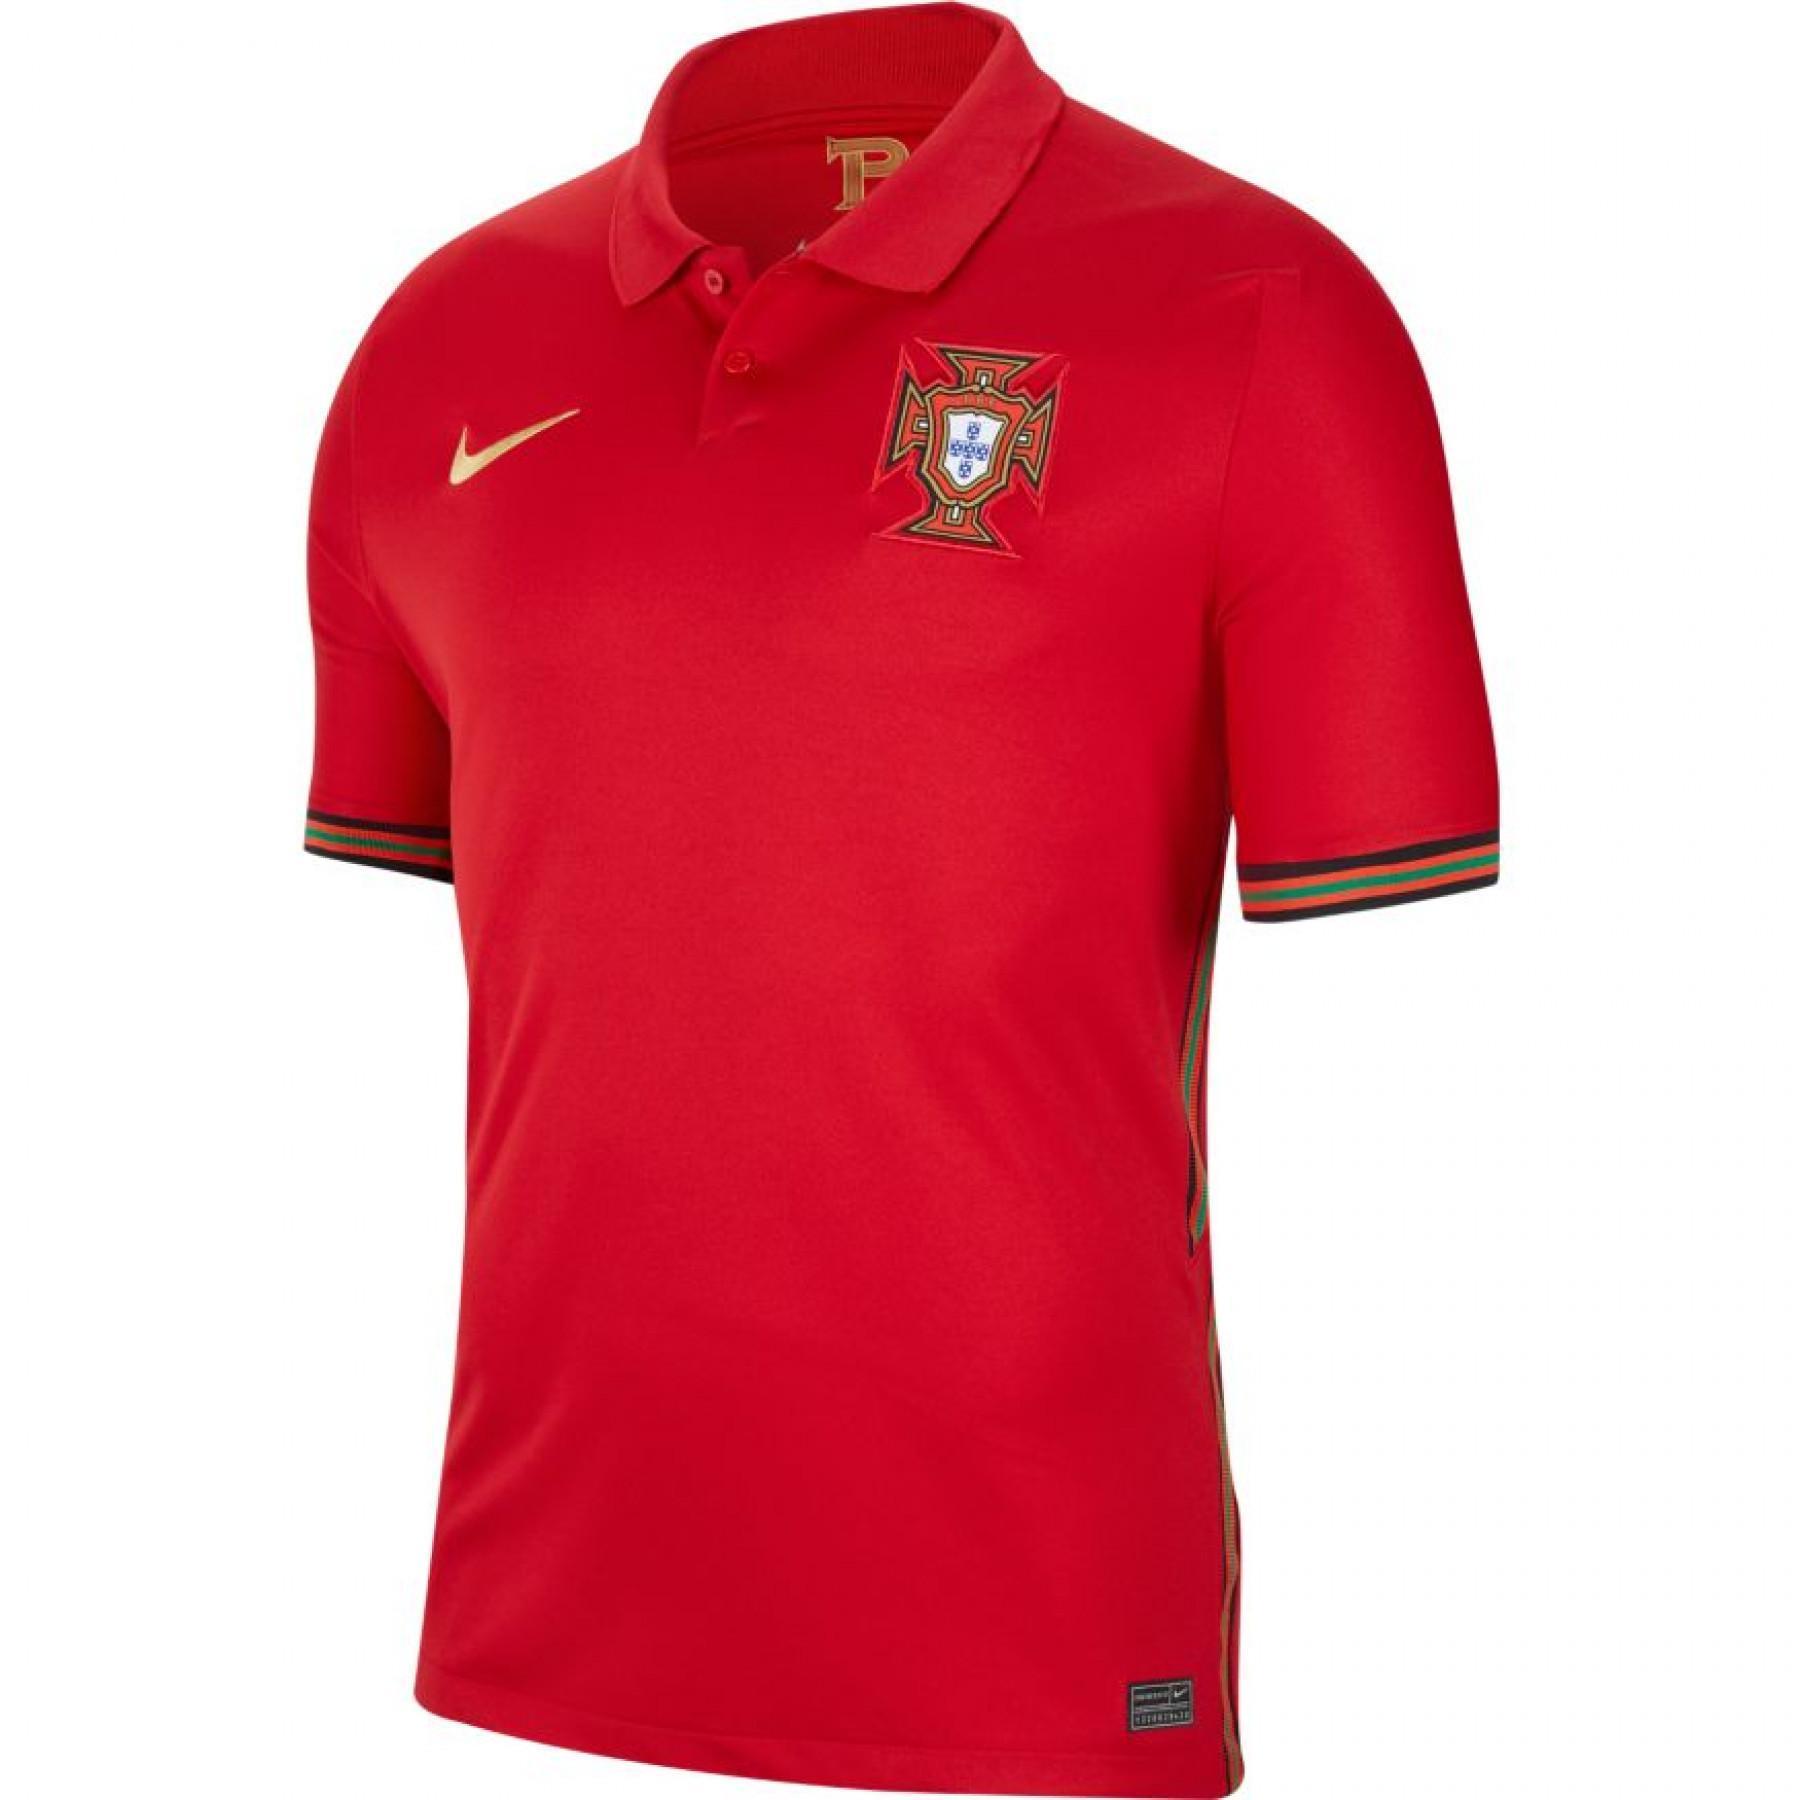 Home jersey Portugal 2020